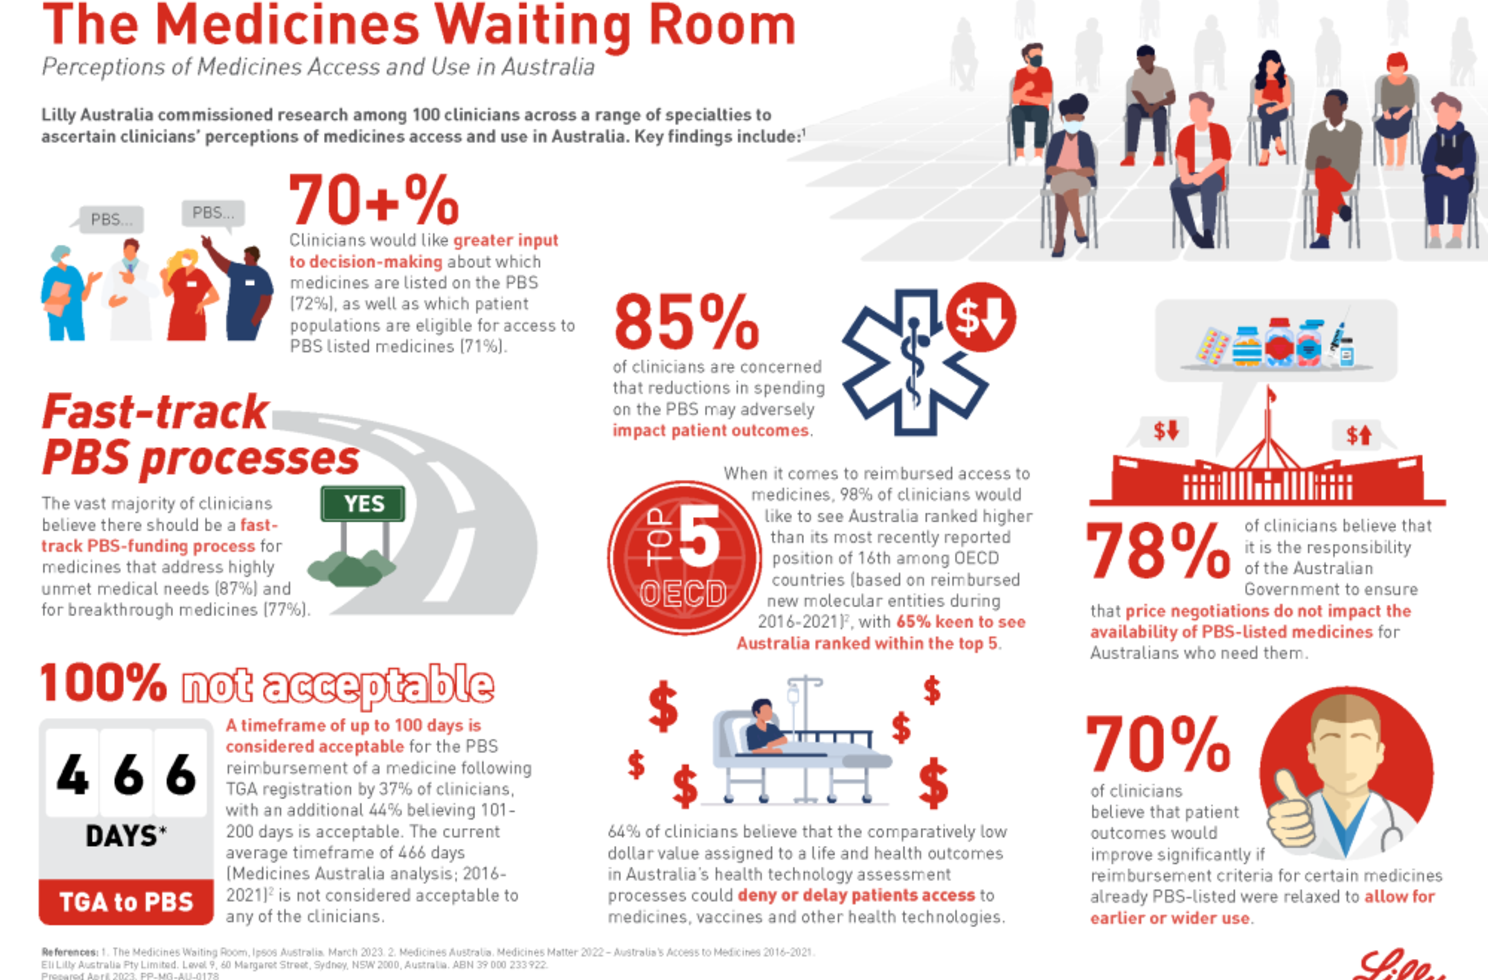 The Medicines Waiting Room Infographic